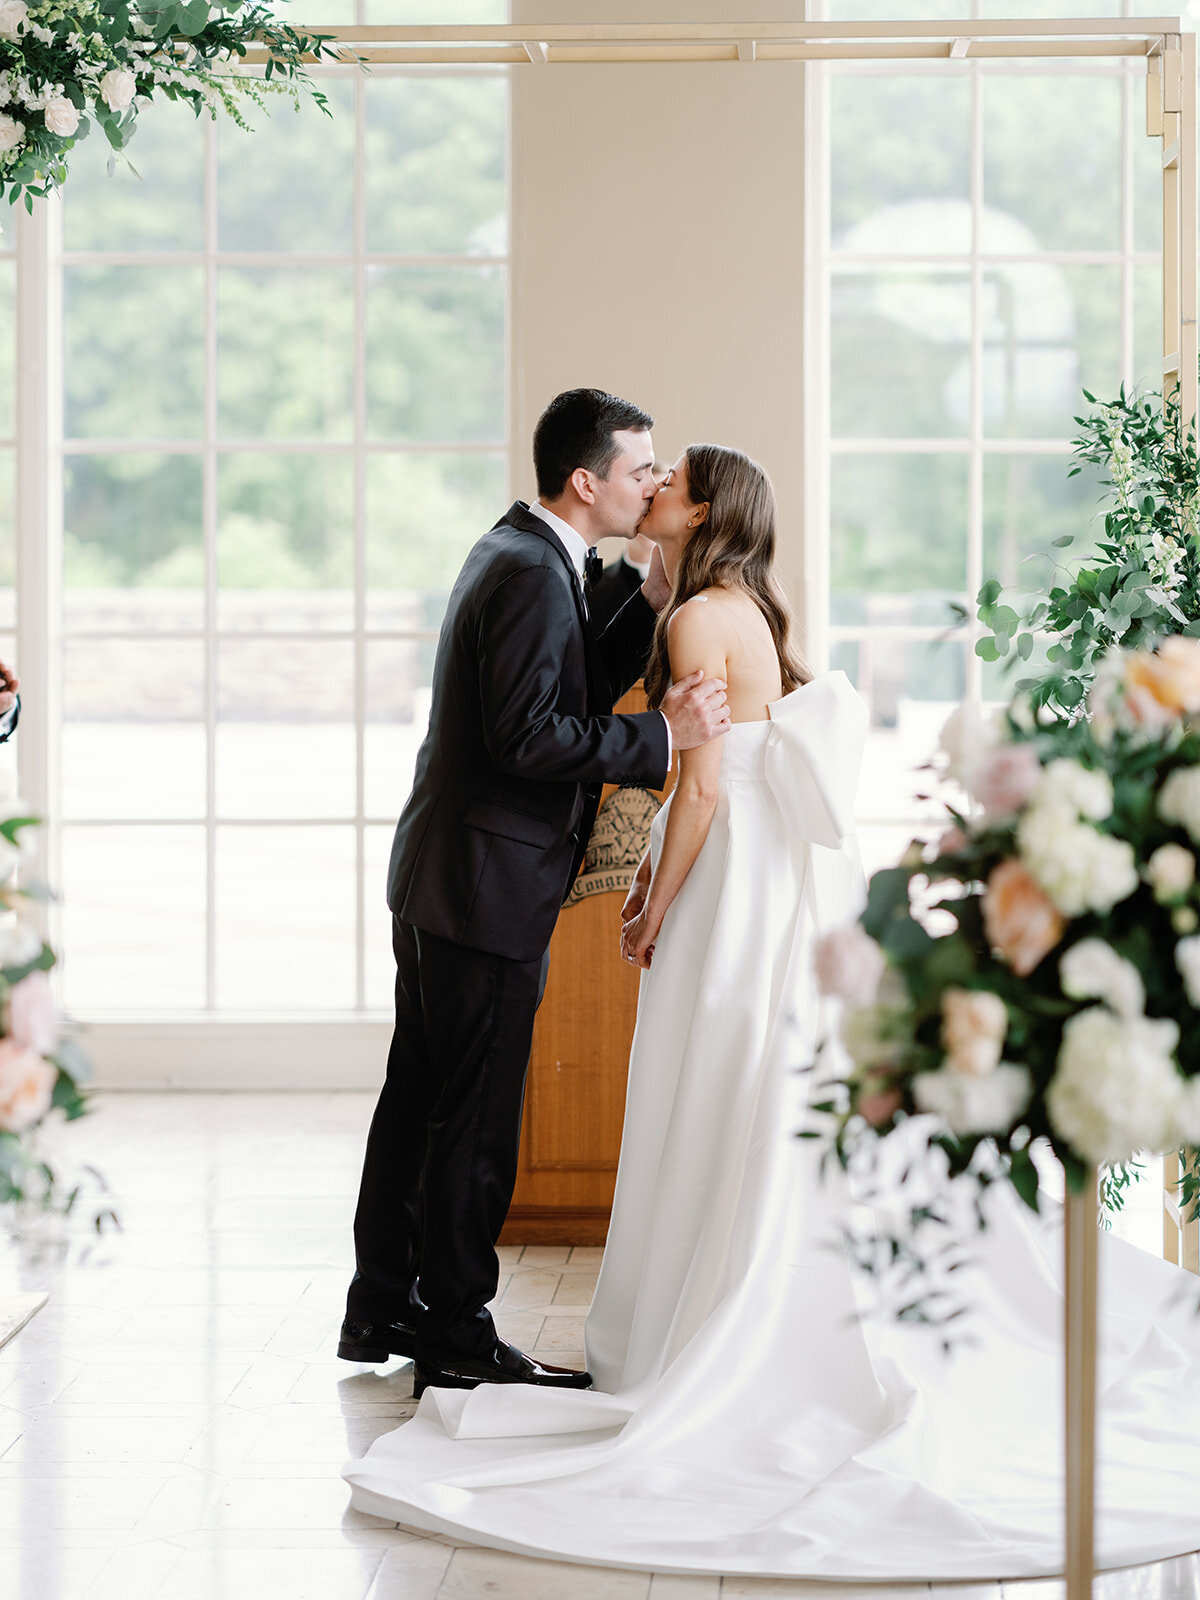 Bride and groom kiss for the first time surrounded by flowers